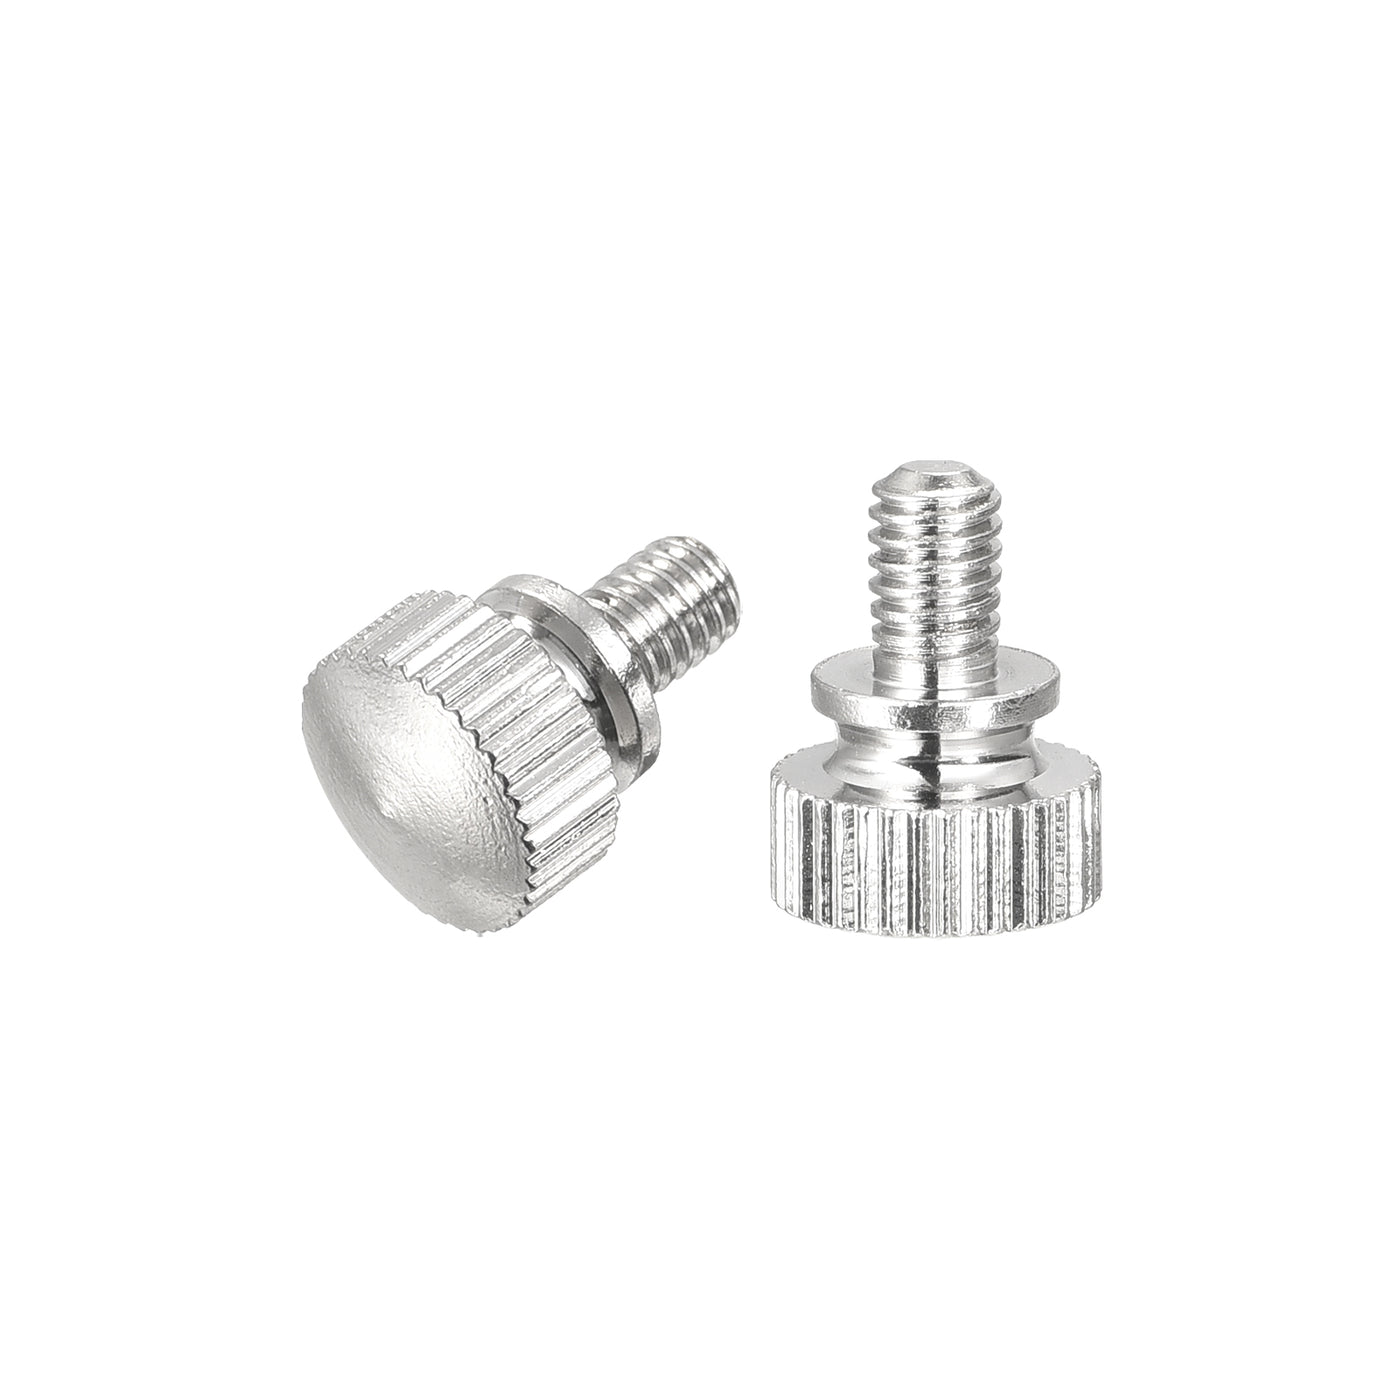 uxcell Uxcell Knurled Thumb Screws, M4x6mm Brass Shoulder Bolts Grip Knobs Fasteners, Nickel Plated 2Pcs